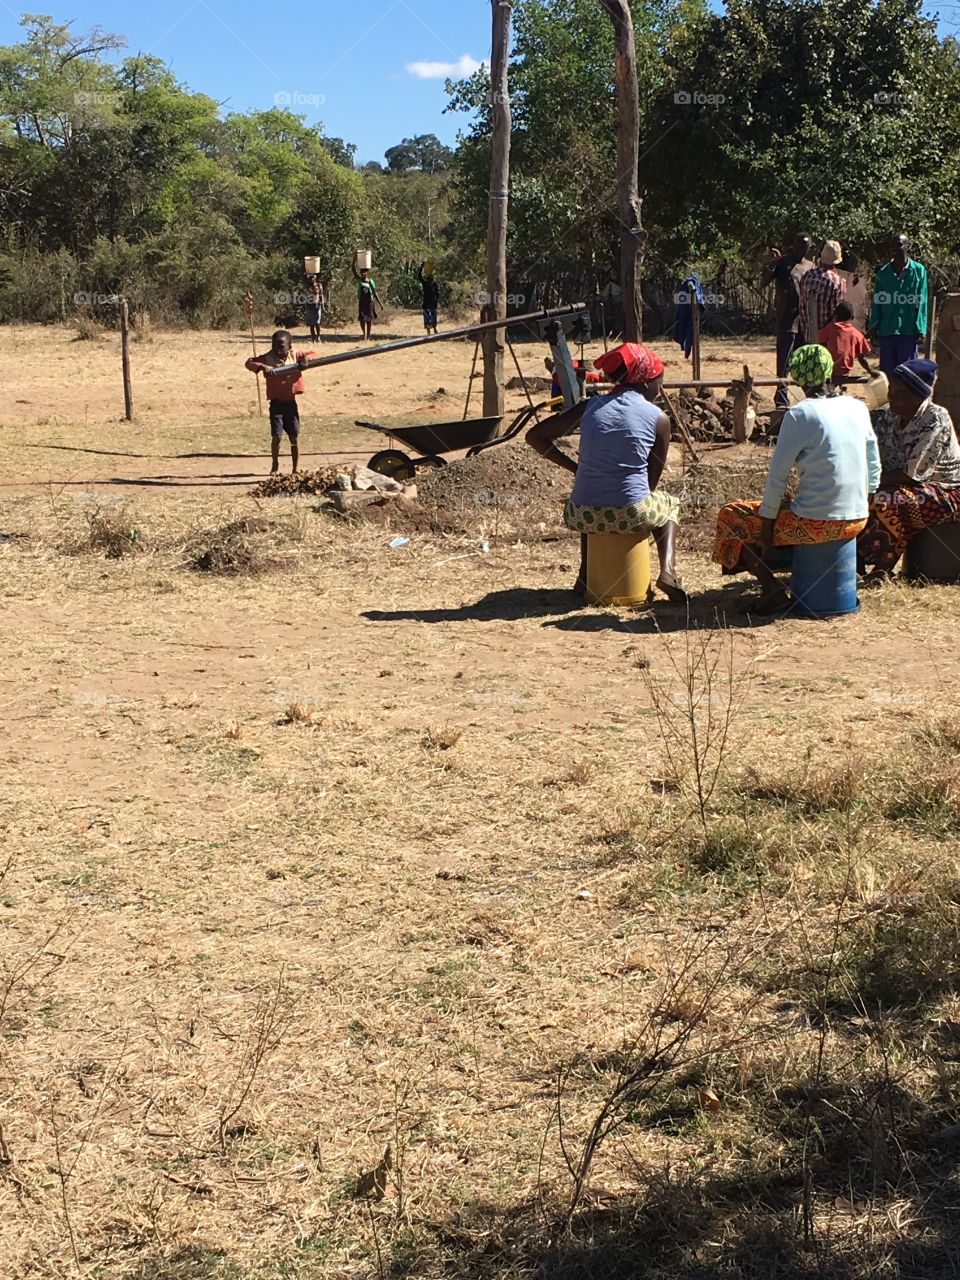 One part of Zimbabwe where the locals pump water for their garden